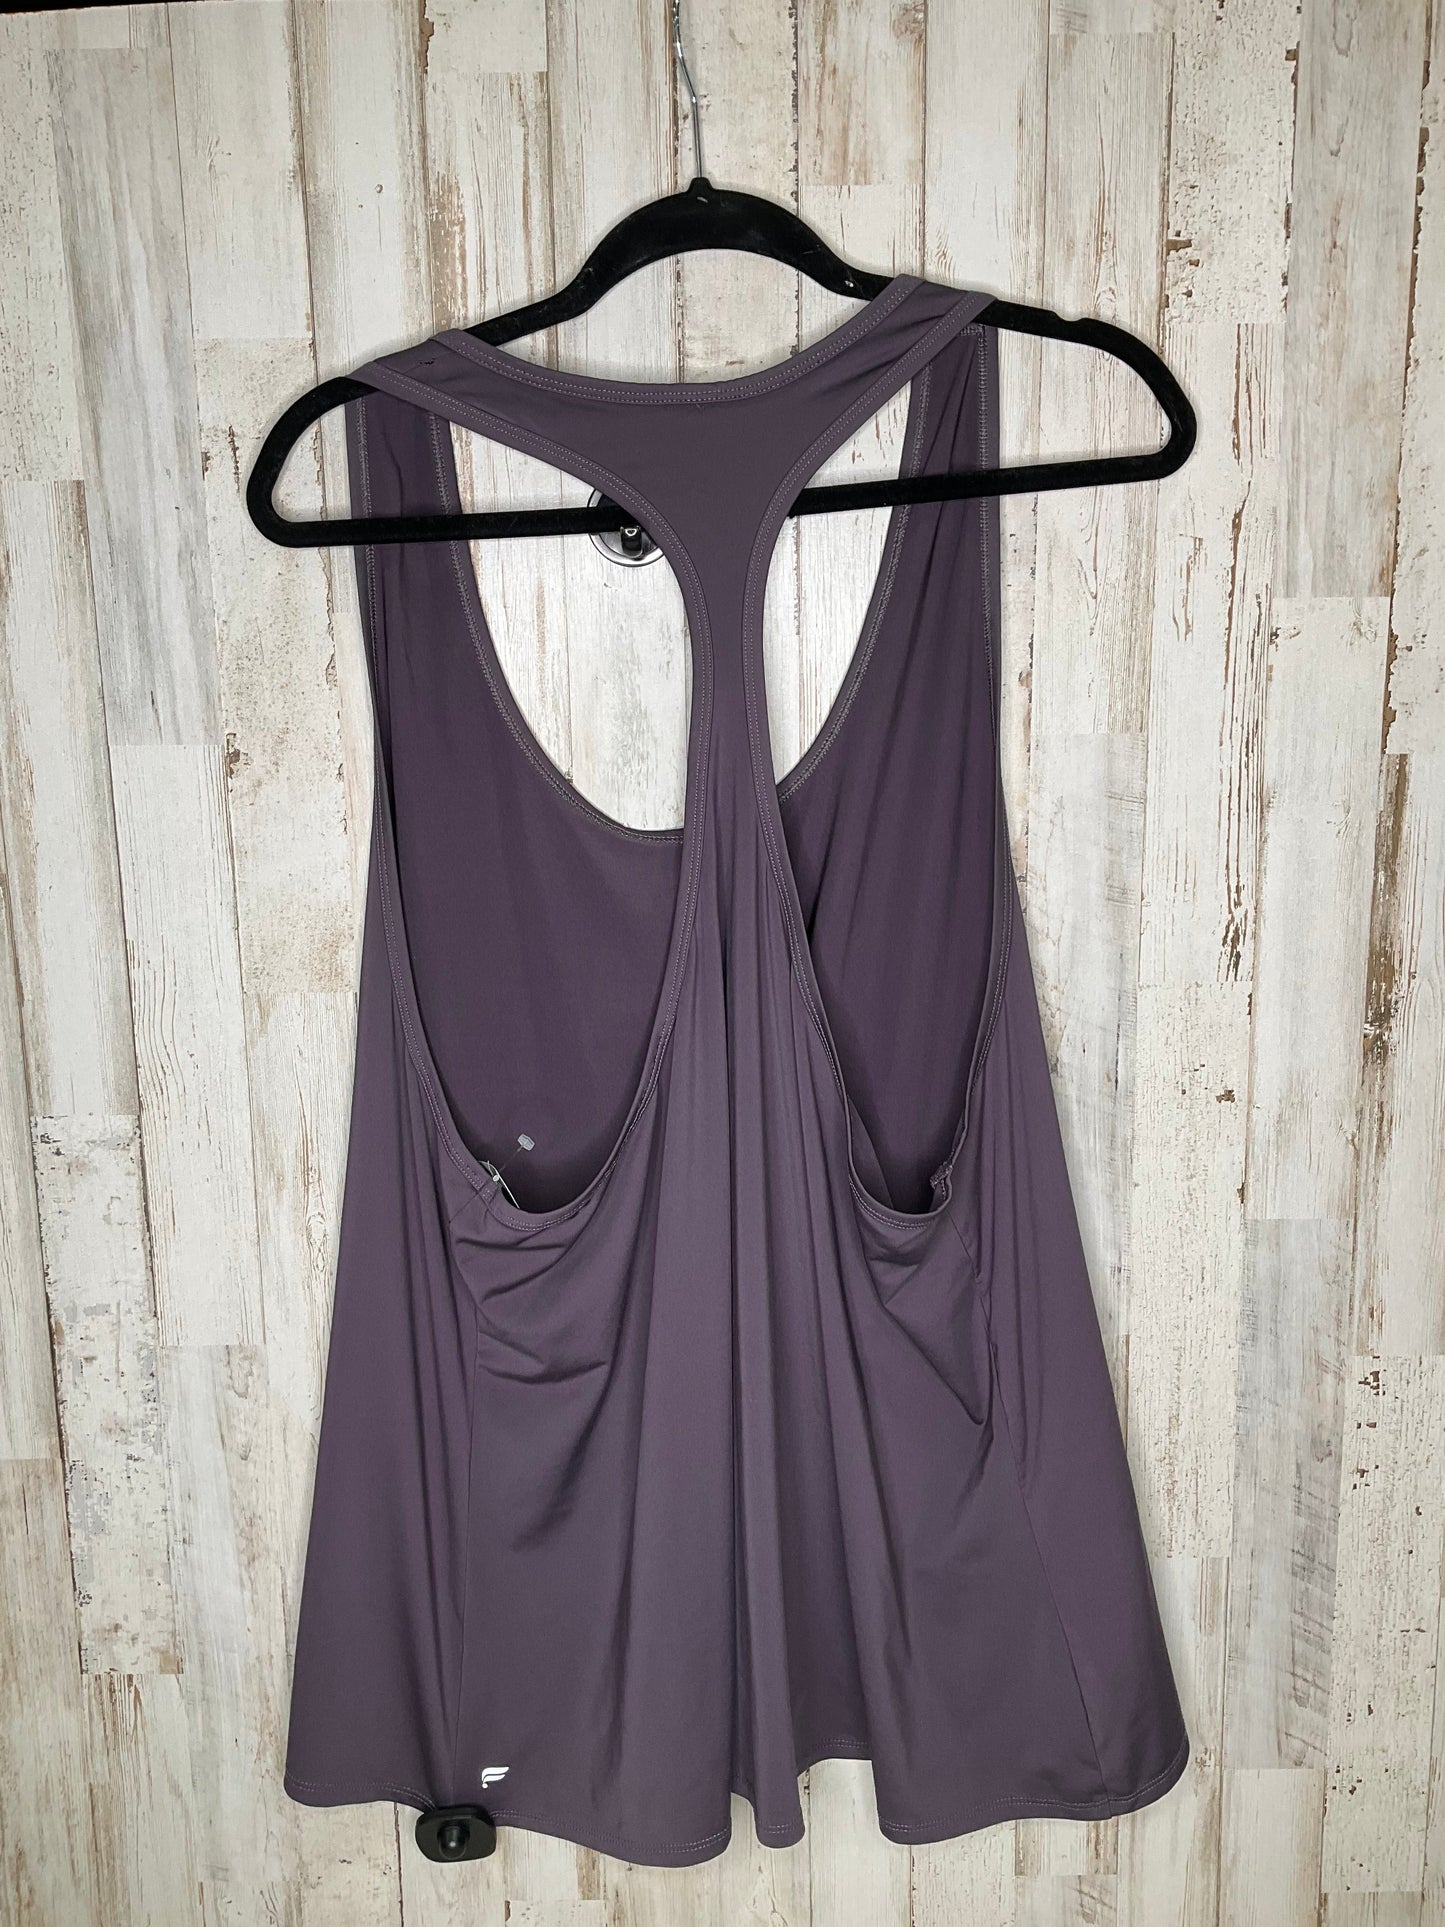 Athletic Tank Top By Fabletics  Size: 2x